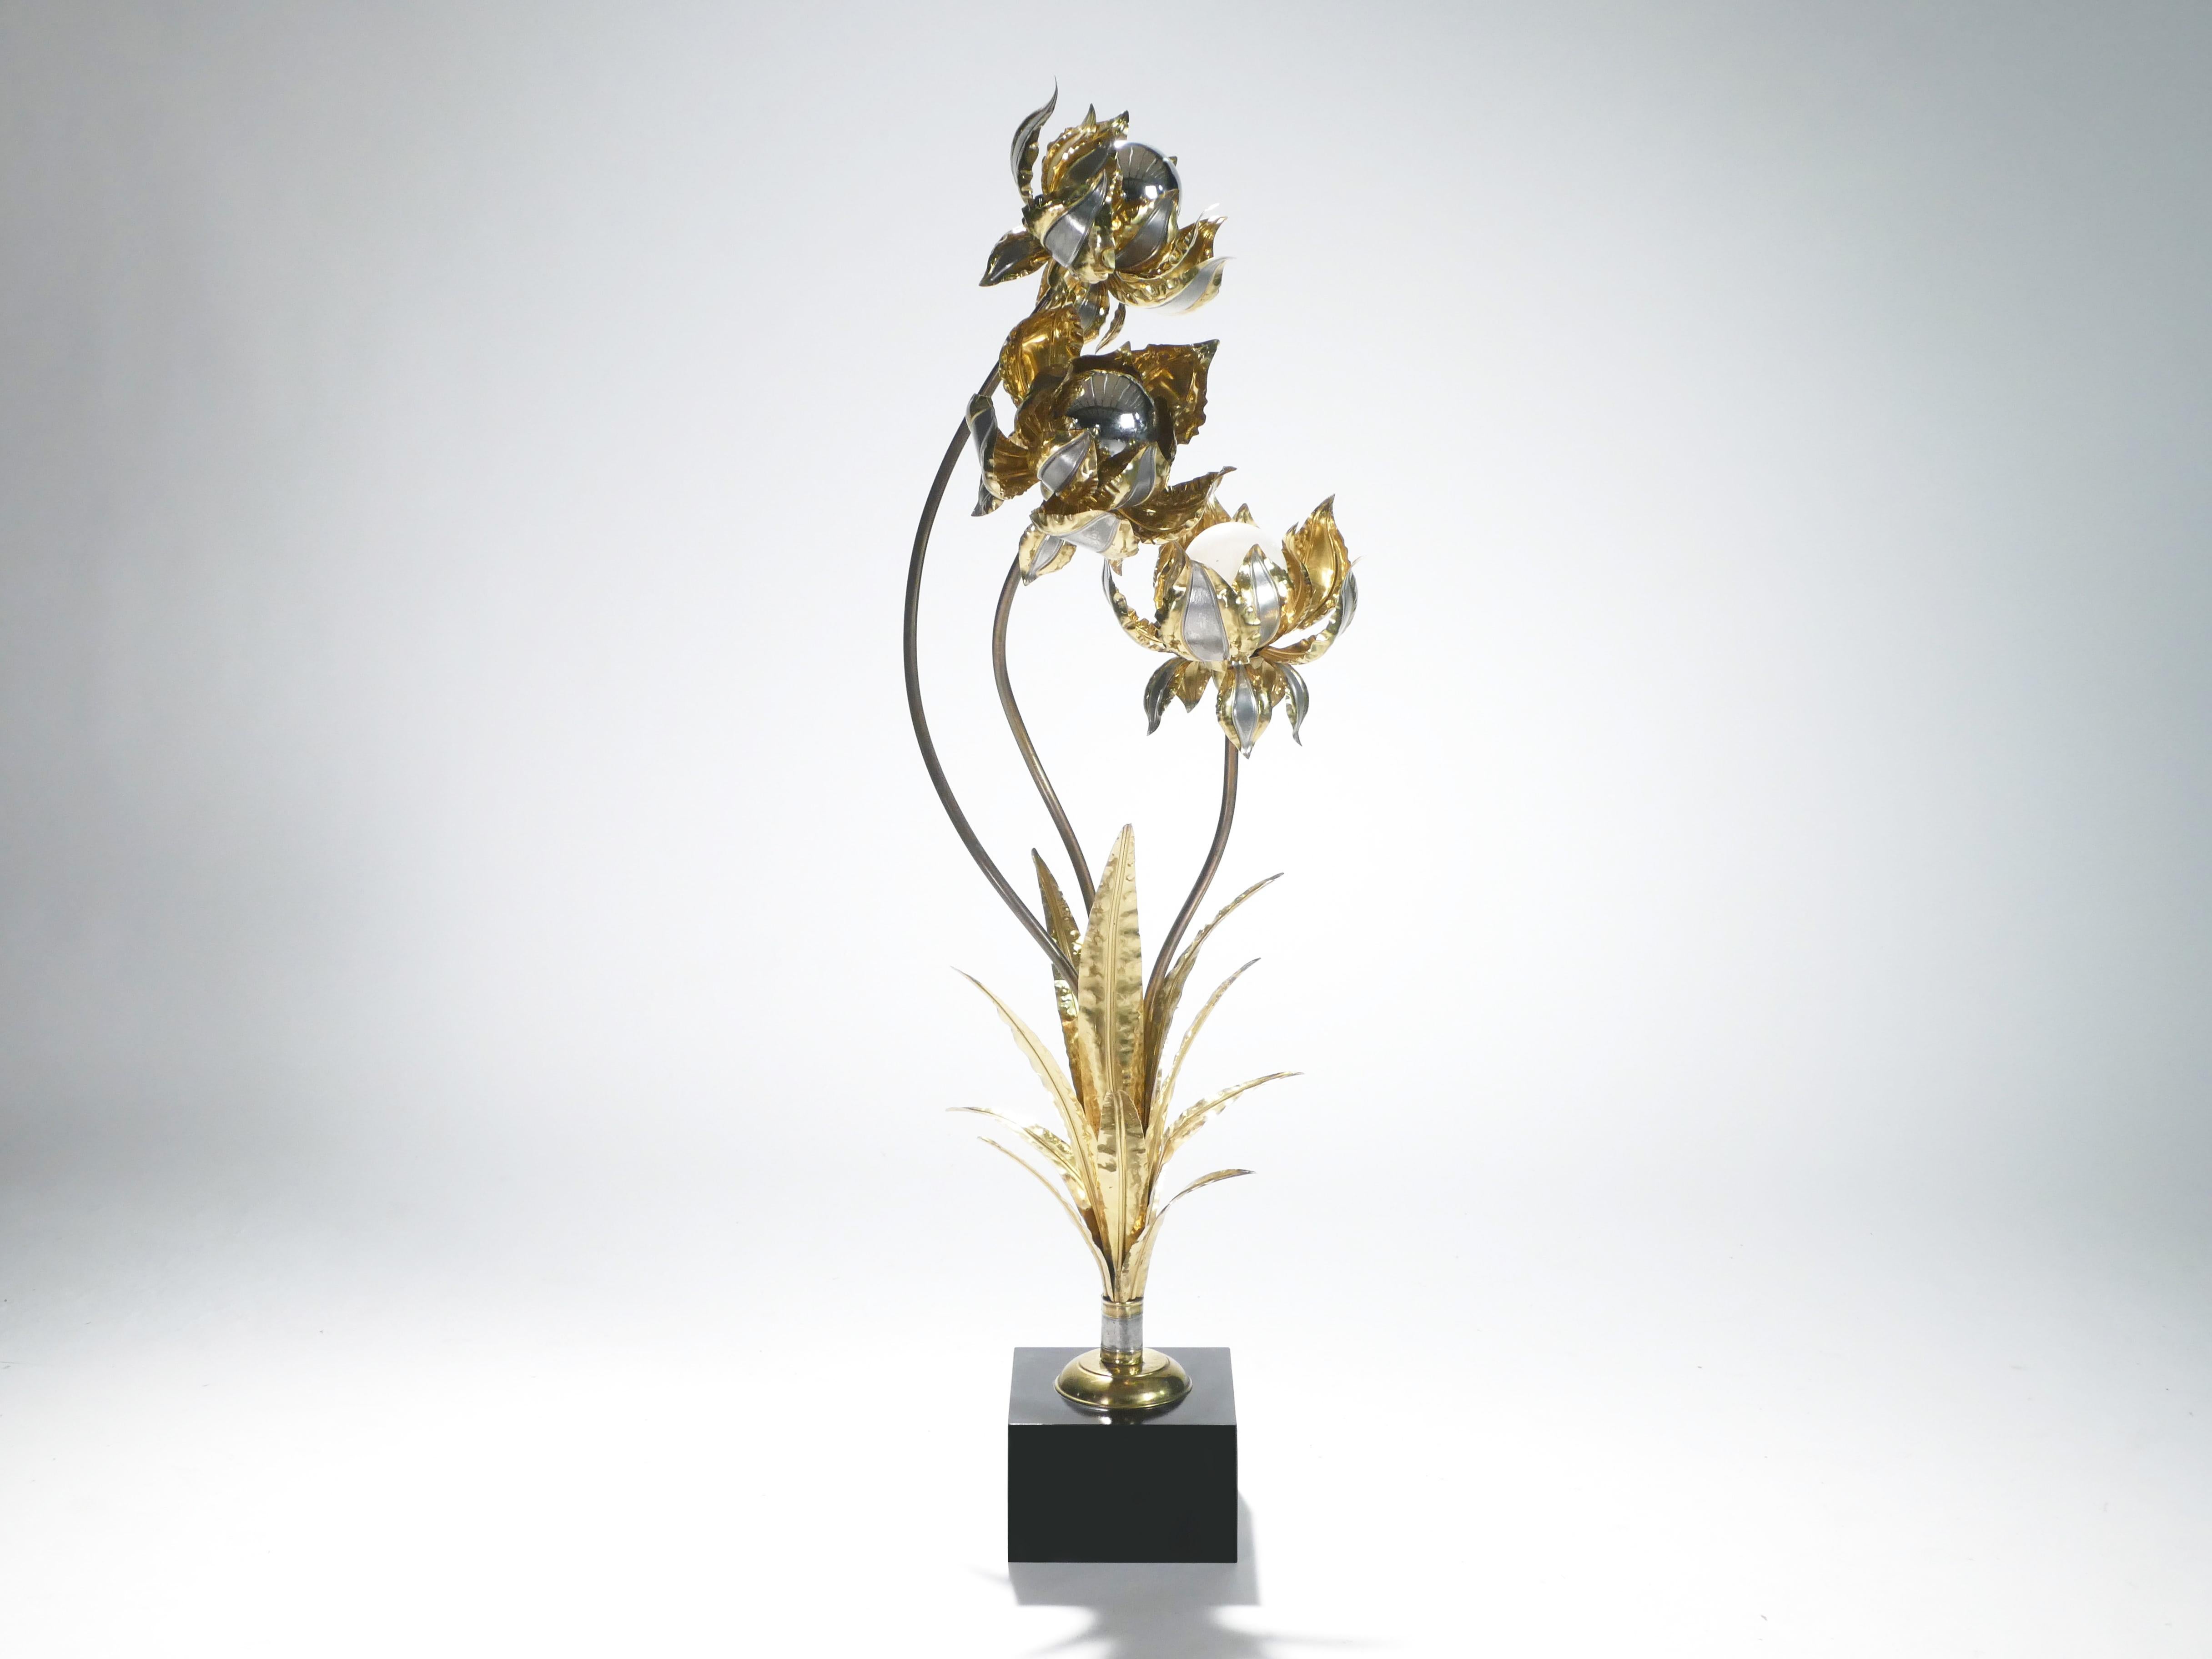 This Henri Fernandez for Maison Honoré floor lamp is exquisitely crafted out of shiny brass and mirrored nickel. Brass leaves fan out from the black lacquer base, and strong, curved brass flower stems stretch upward, culminating in beautifully